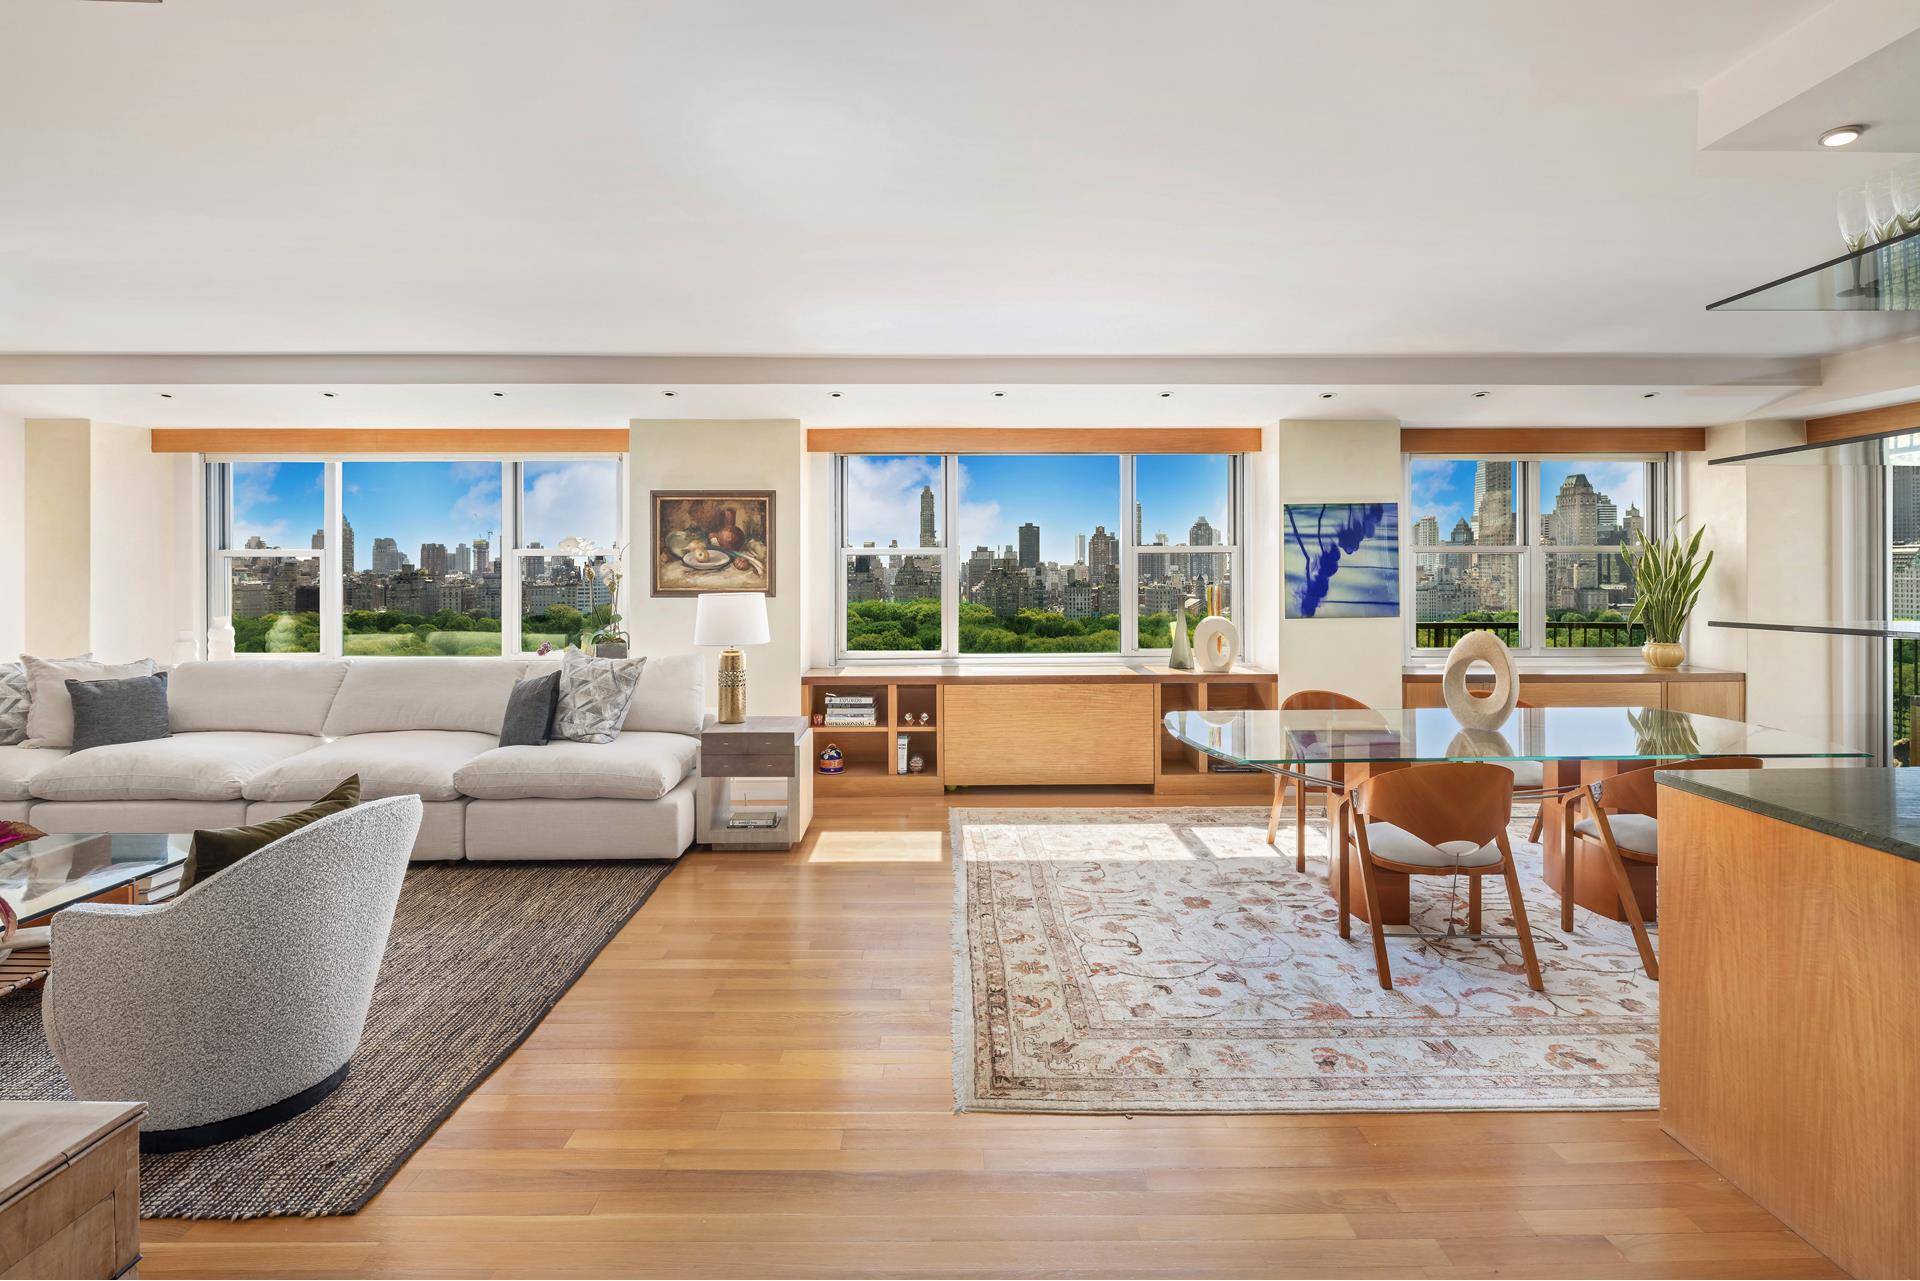 Behold spectacular views of Central Park, the southern and eastern skyline, and beyond from this high floor 3 bedroom, 3 bathroom residence, perfectly located at 68th Street and Central Park ...